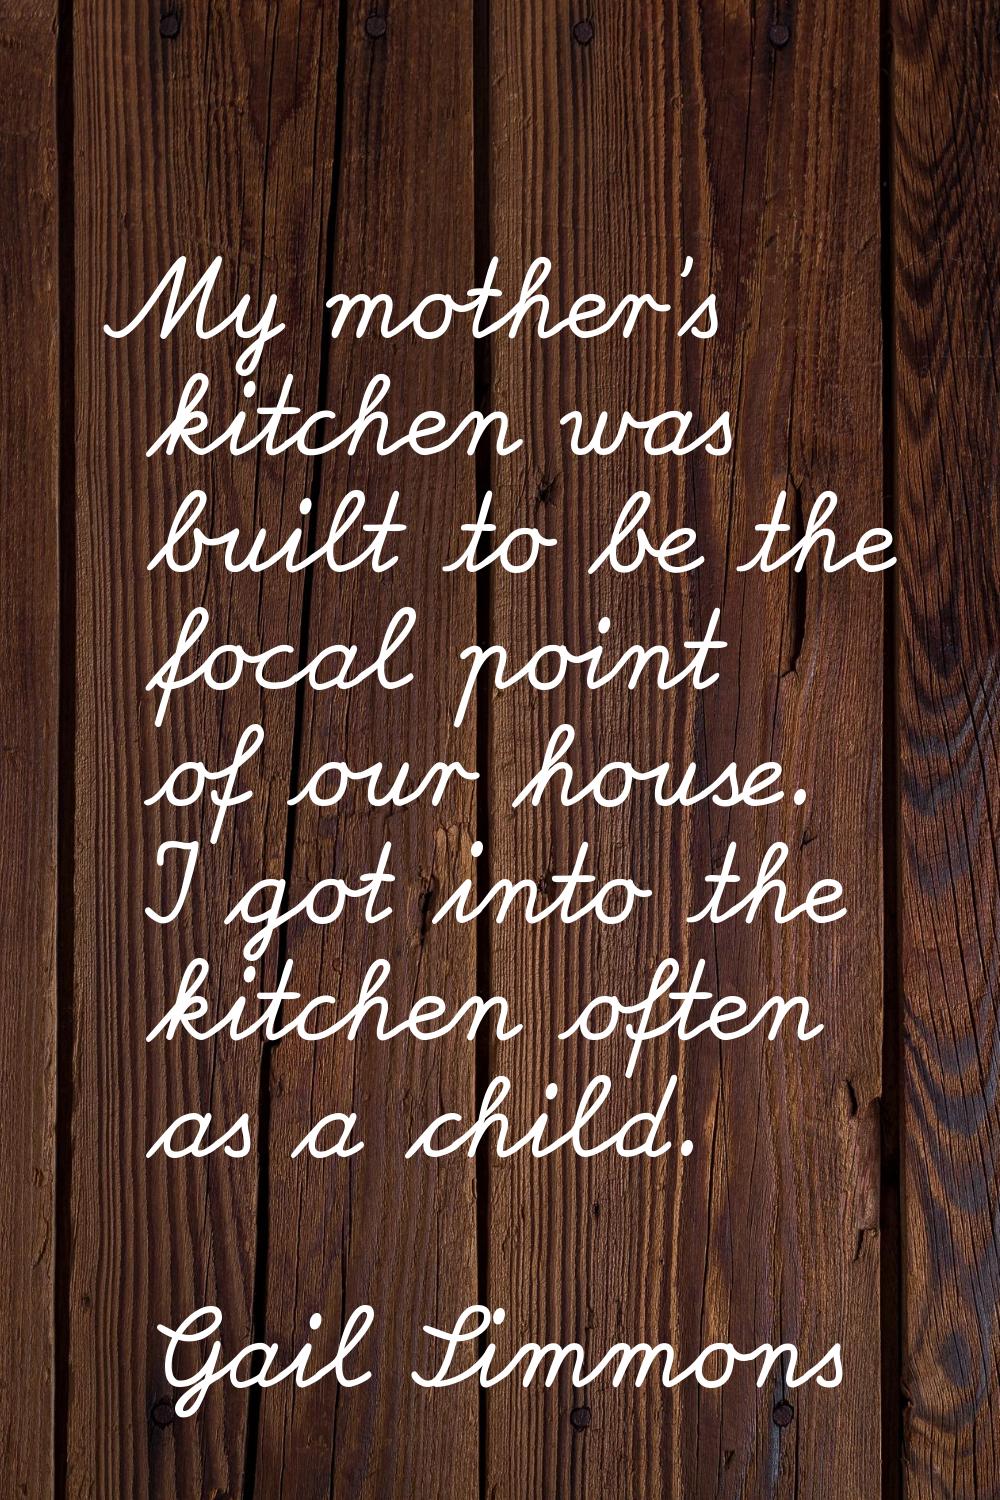 My mother's kitchen was built to be the focal point of our house. I got into the kitchen often as a